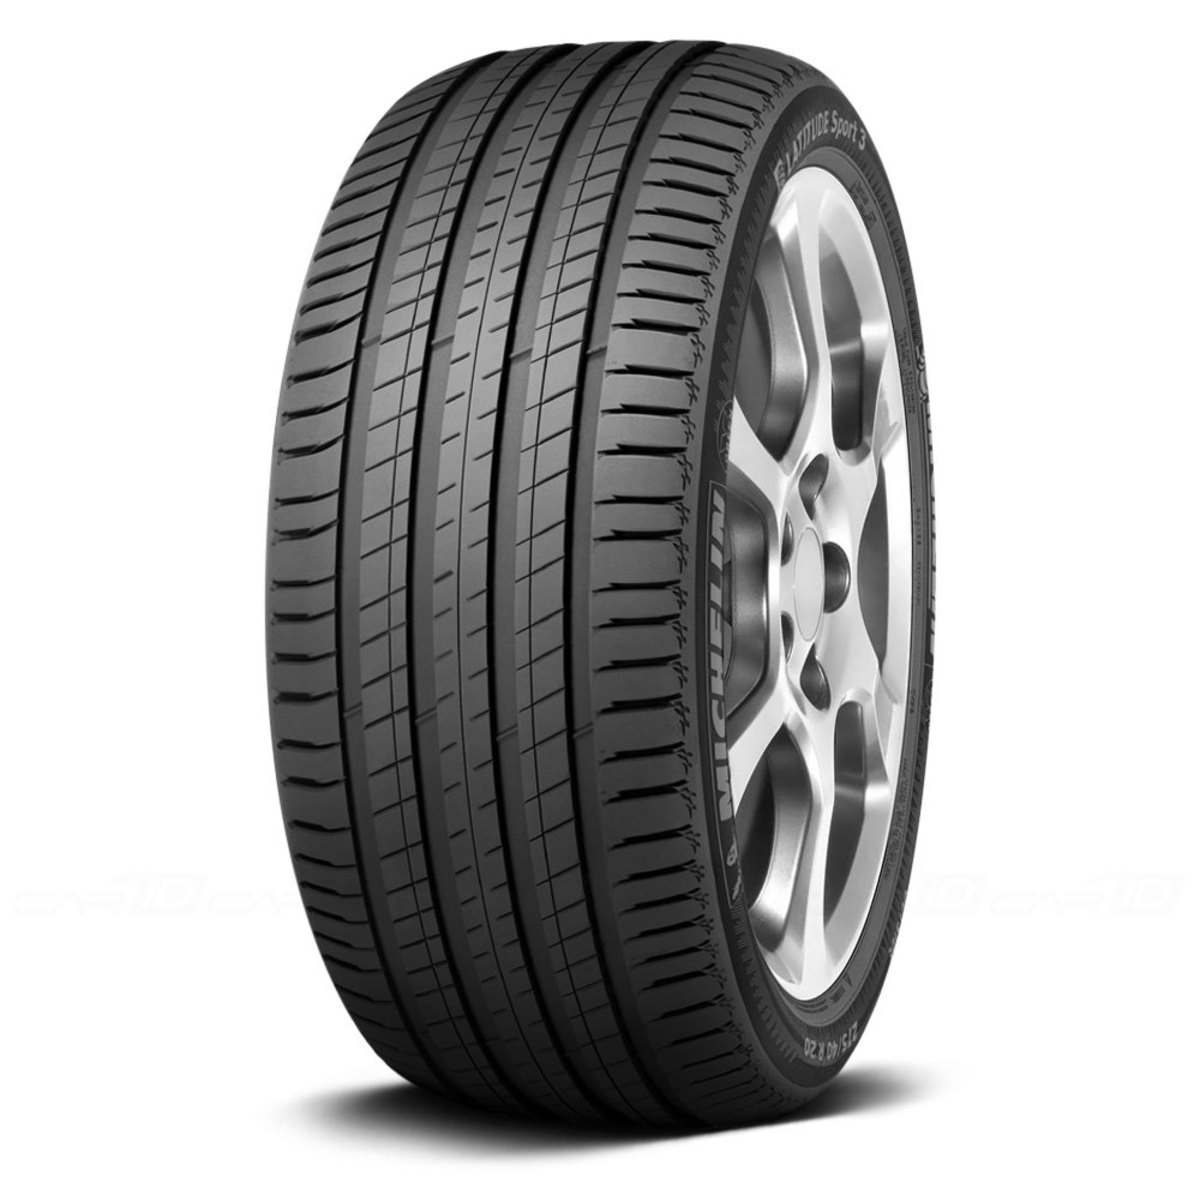 michelin-latitude-sport-3-tire-reviews-and-ratings